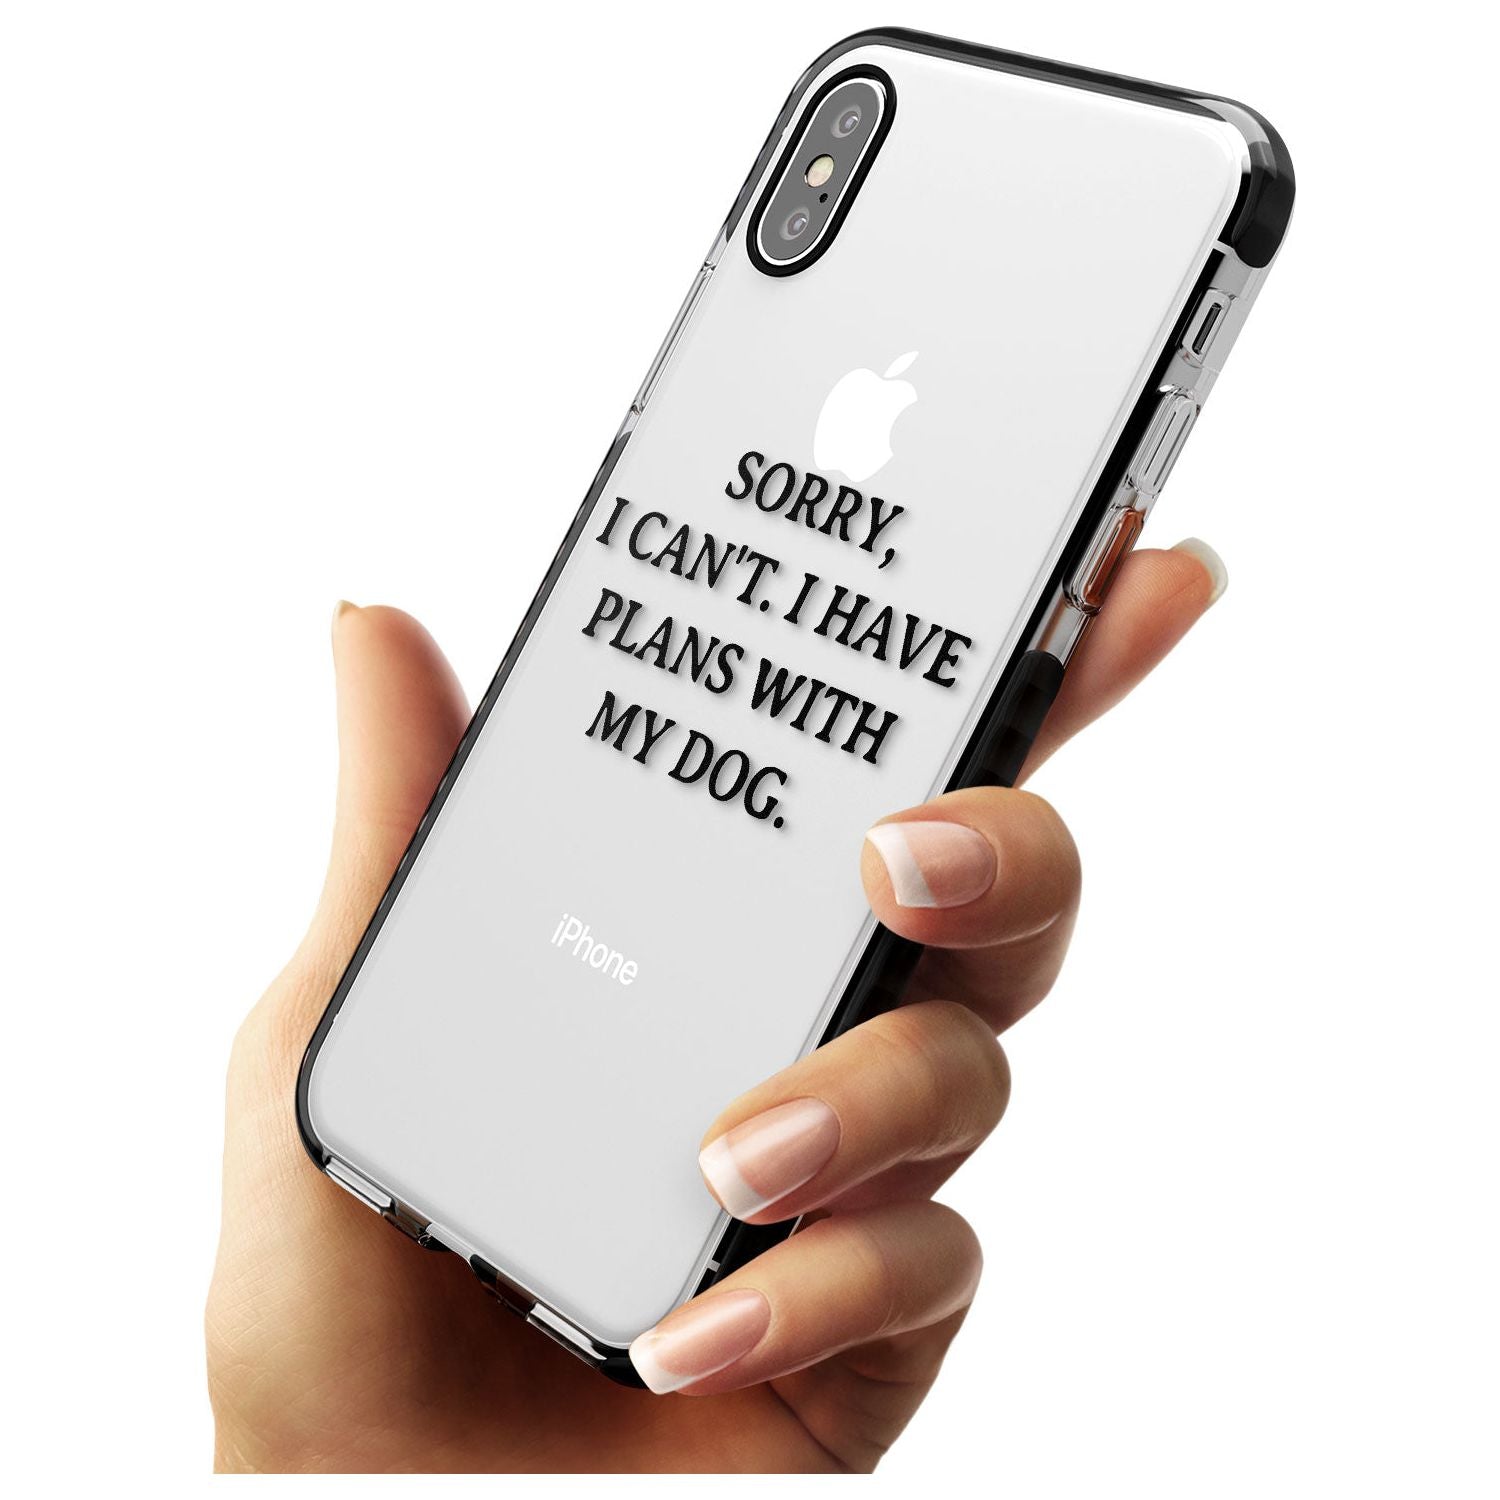 Plans with Dog Black Impact Phone Case for iPhone X XS Max XR